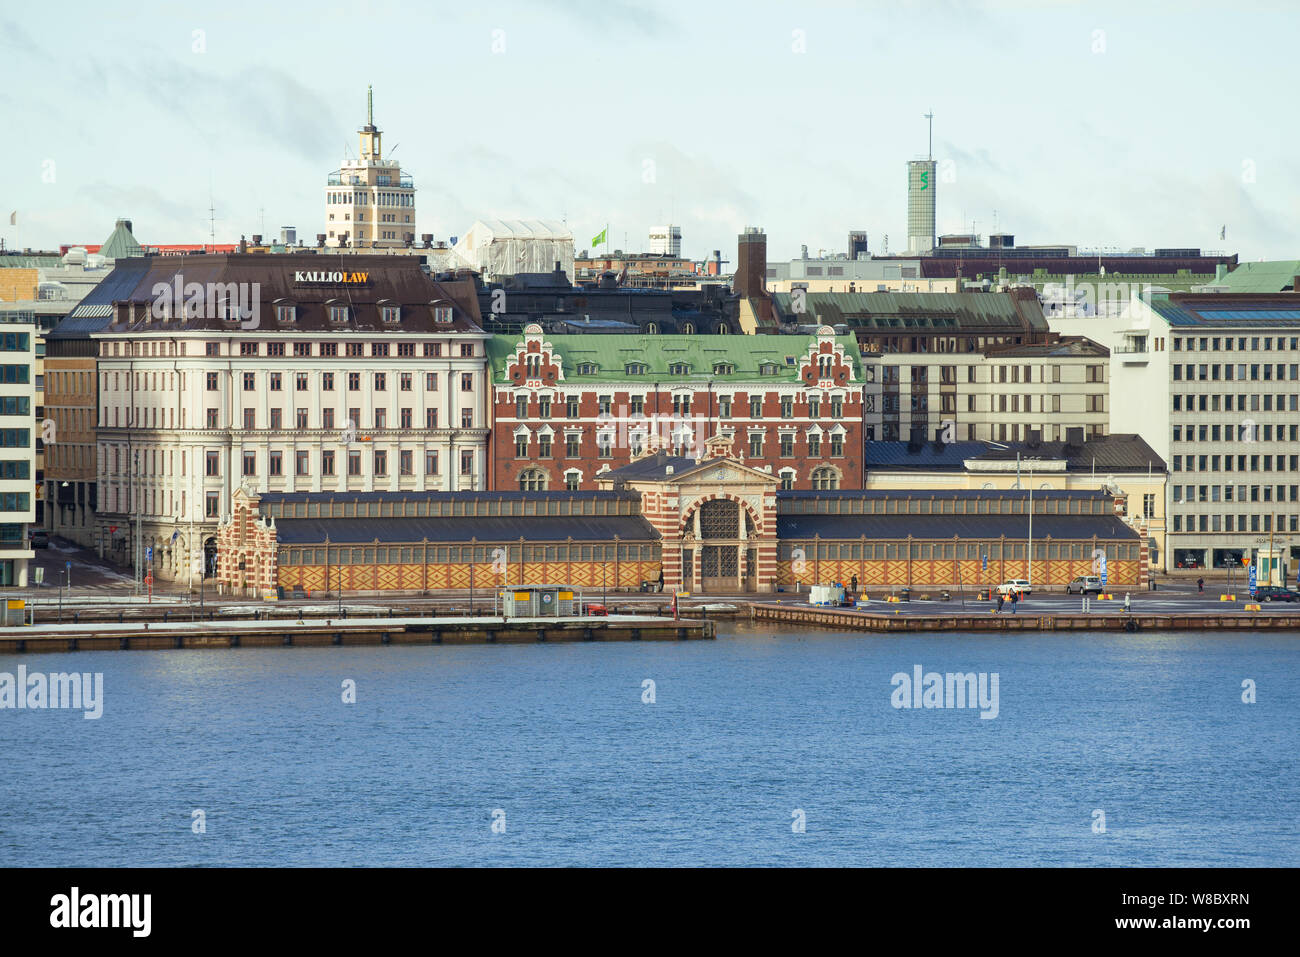 HELSINKI, FINLAND - MARCH 10, 2019: View of  old market building in South Harbor on a March day Stock Photo